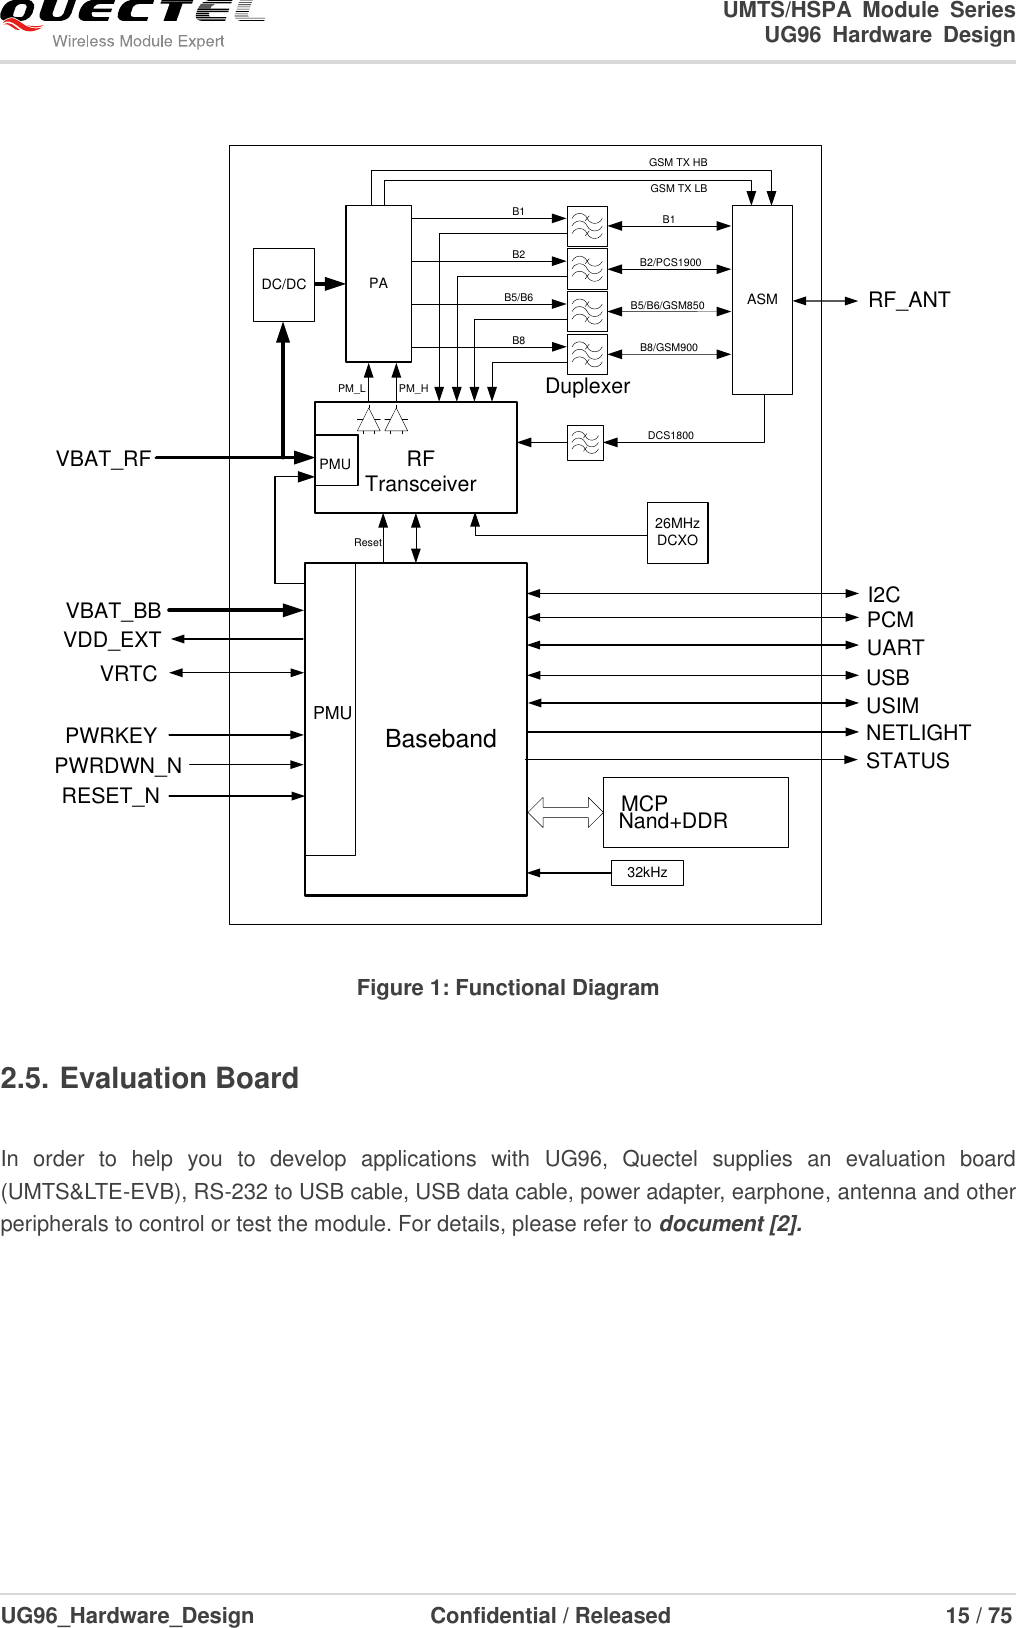                                                                        UMTS/HSPA  Module  Series                                                                 UG96  Hardware  Design  UG96_Hardware_Design                  Confidential / Released                             15 / 75    PWRKEYRESET_N 32kHz PMU BasebandMCPRF_ANTUSIMSTATUSUARTVBAT_BBUSBVBAT_RFB1VDD_EXTVRTCNand+DDR PWRDWN_NRF TransceiverNETLIGHT26MHzDCXOB2/PCS1900GSM TX LBDuplexerPCMPMUResetI2CPA ASMB5/B6/GSM850B8/GSM900DC/DCB1B2B5/B6B8PM_HPM_LGSM TX HBDCS1800 Figure 1: Functional Diagram 2.5. Evaluation Board    In  order  to  help  you  to  develop  applications  with  UG96,  Quectel  supplies  an  evaluation  board (UMTS&amp;LTE-EVB), RS-232 to USB cable, USB data cable, power adapter, earphone, antenna and other peripherals to control or test the module. For details, please refer to document [2]. 